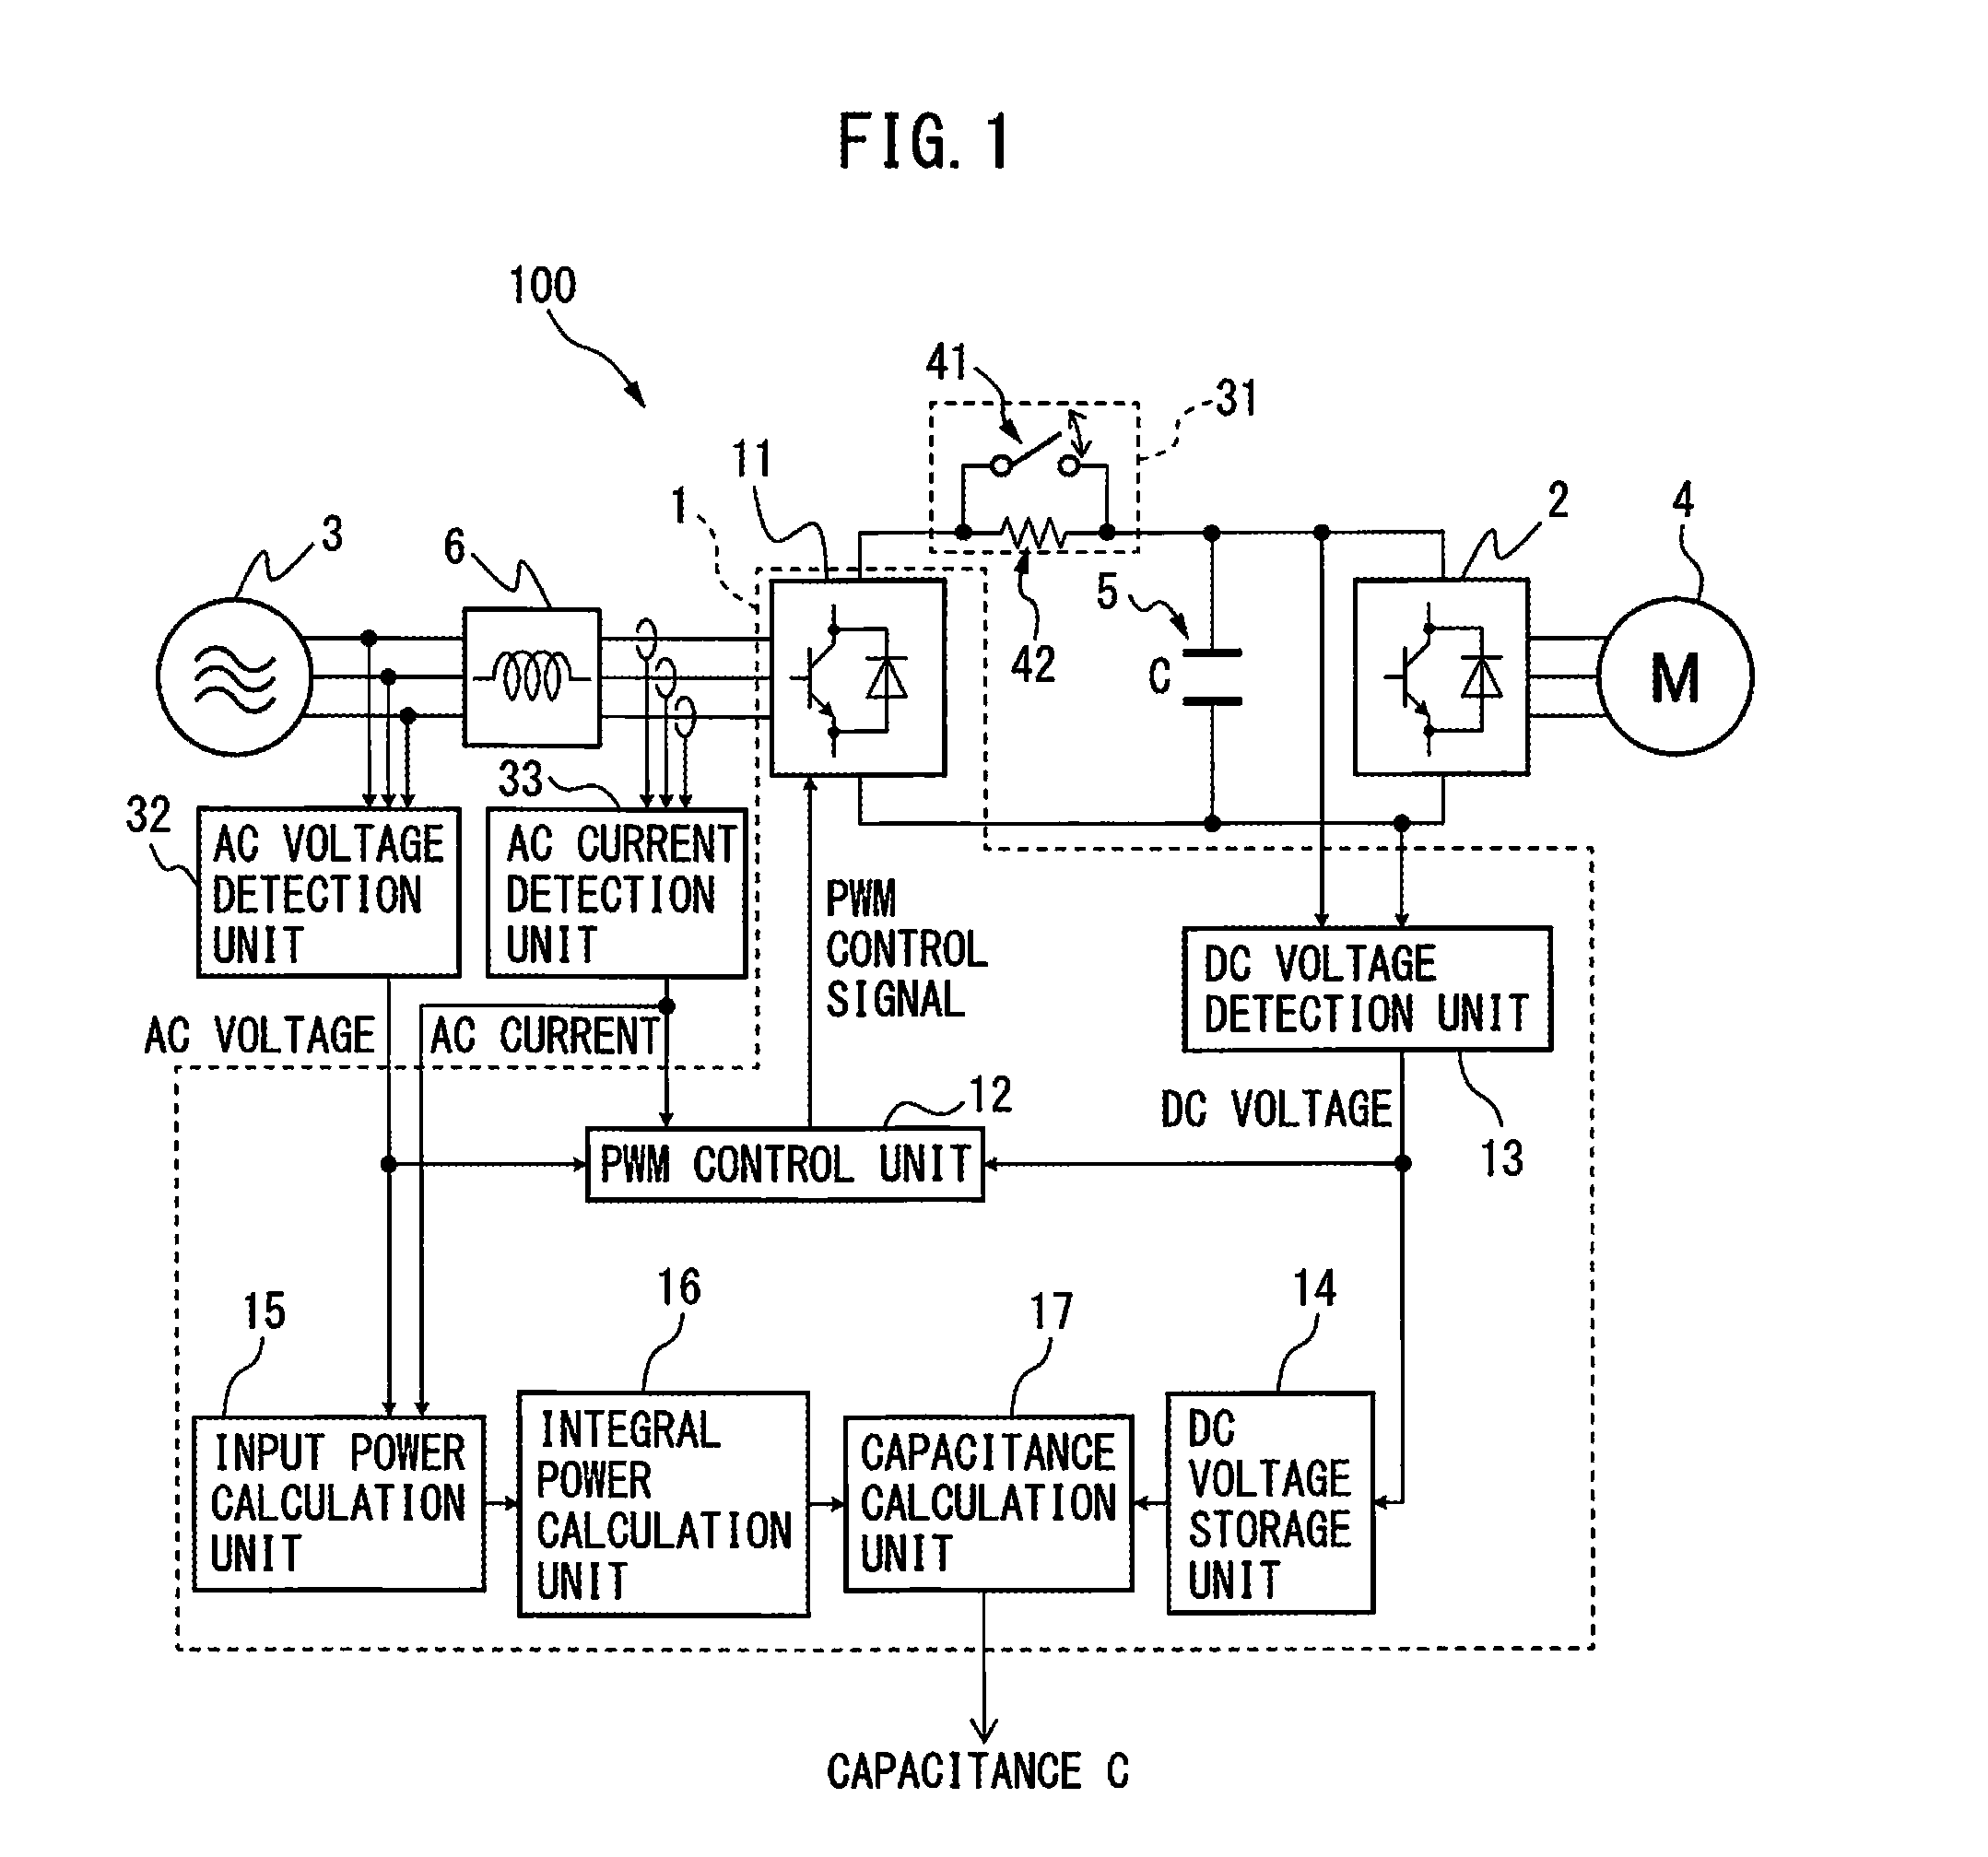 Pwm rectifier including capacitance calculation unit